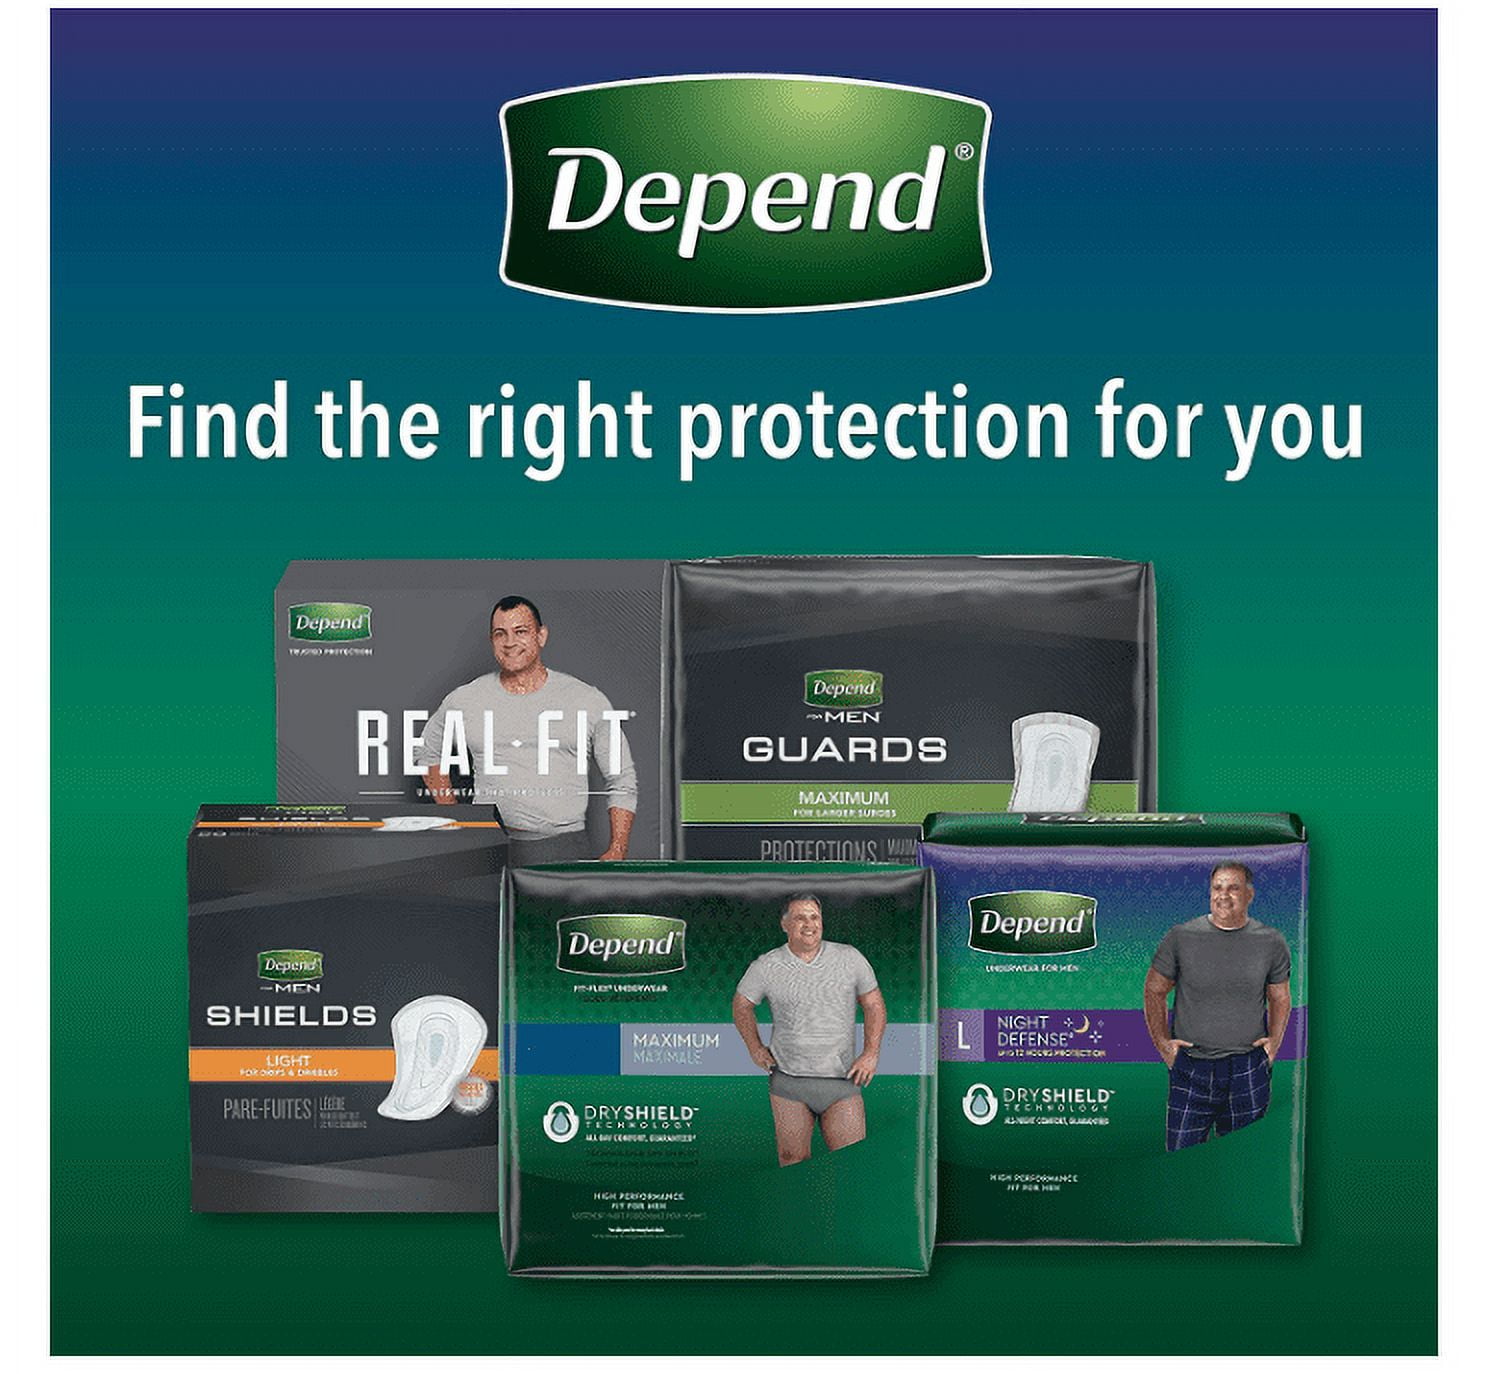 Depend Night Defense Adult Incontinence Underwear for Men, Overnight,  Disposable, X-Large, 24 Count (2 Packs of 12) (Packaging May Vary) 